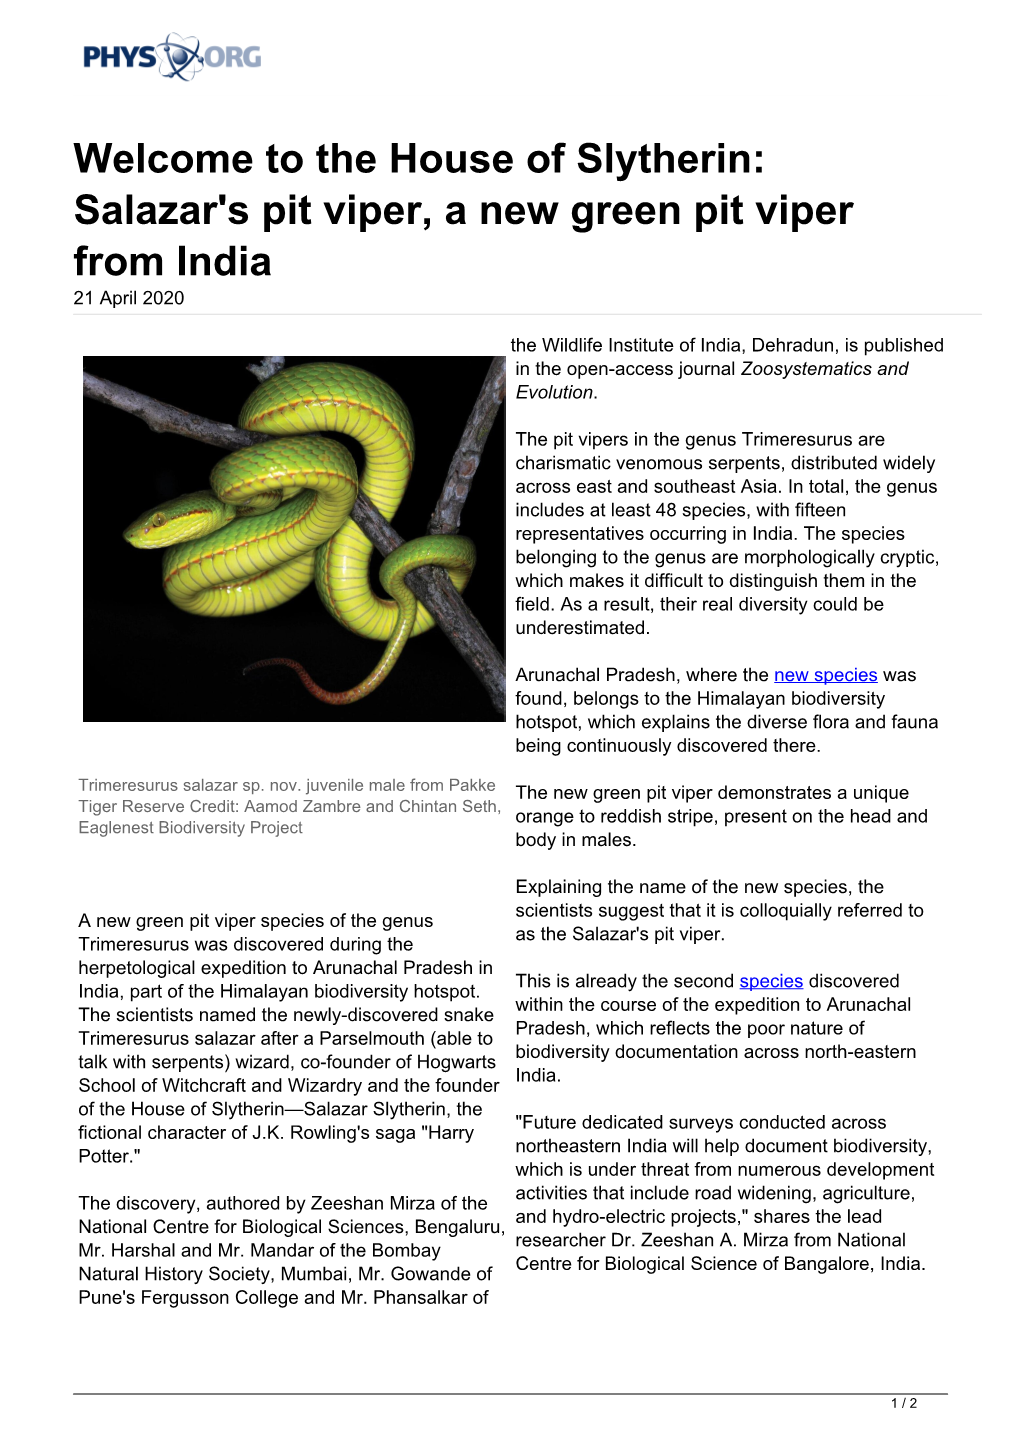 Welcome to the House of Slytherin: Salazar's Pit Viper, a New Green Pit Viper from India 21 April 2020